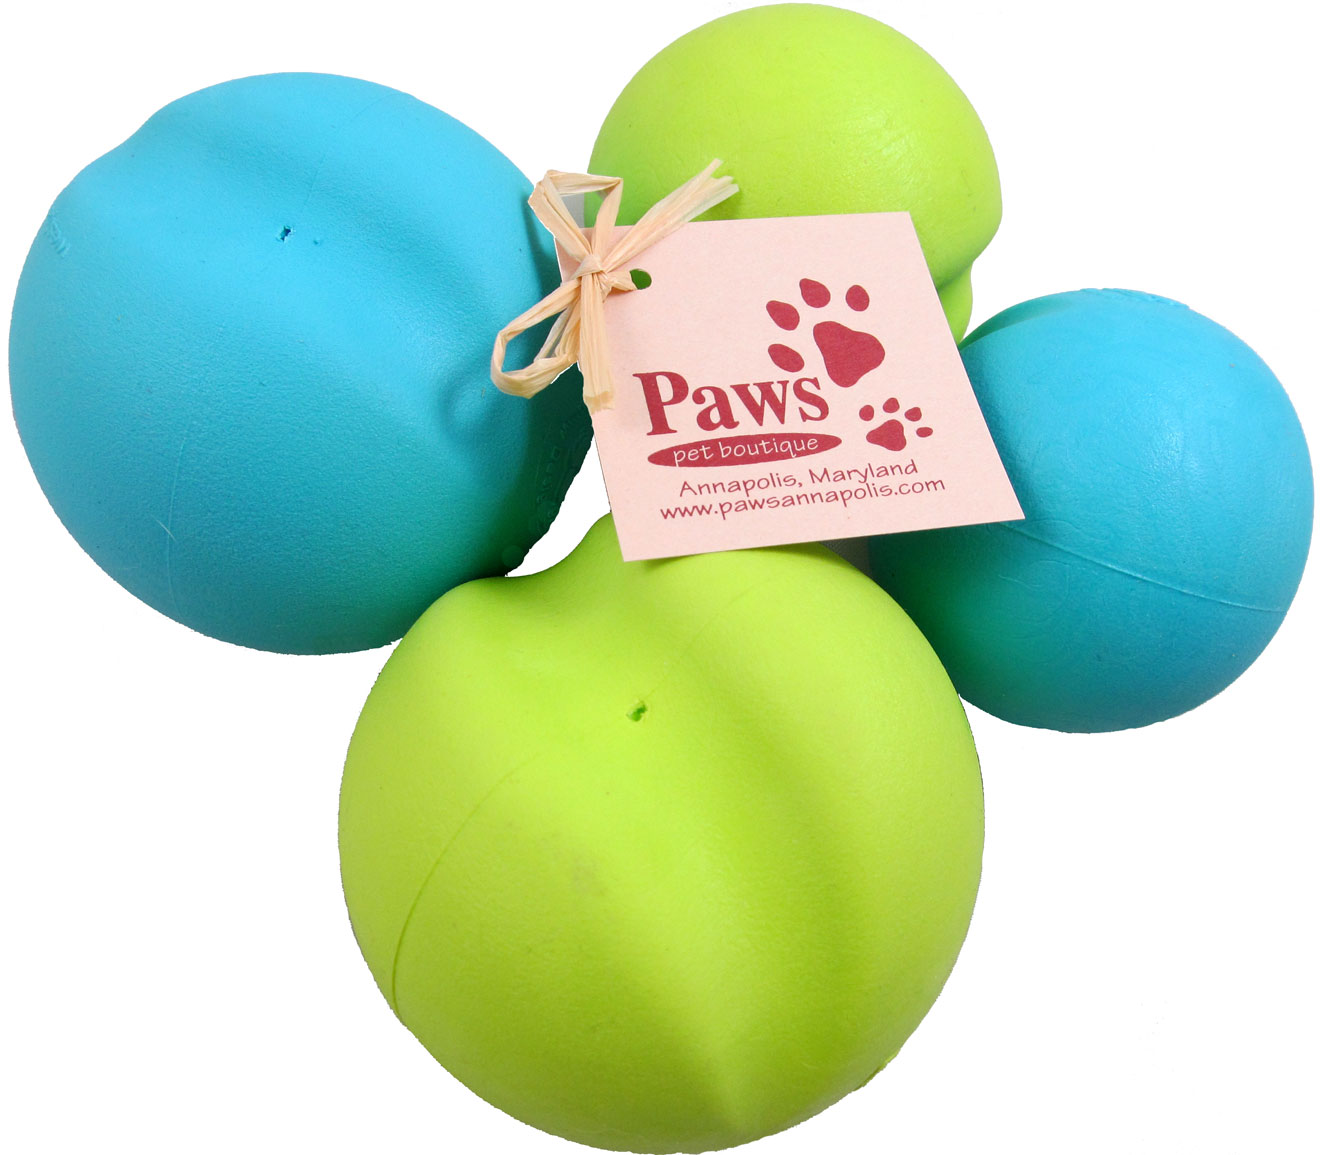 https://www.pawspetboutique.com/product_images/uploaded_images/ball-toughwp4w.jpg